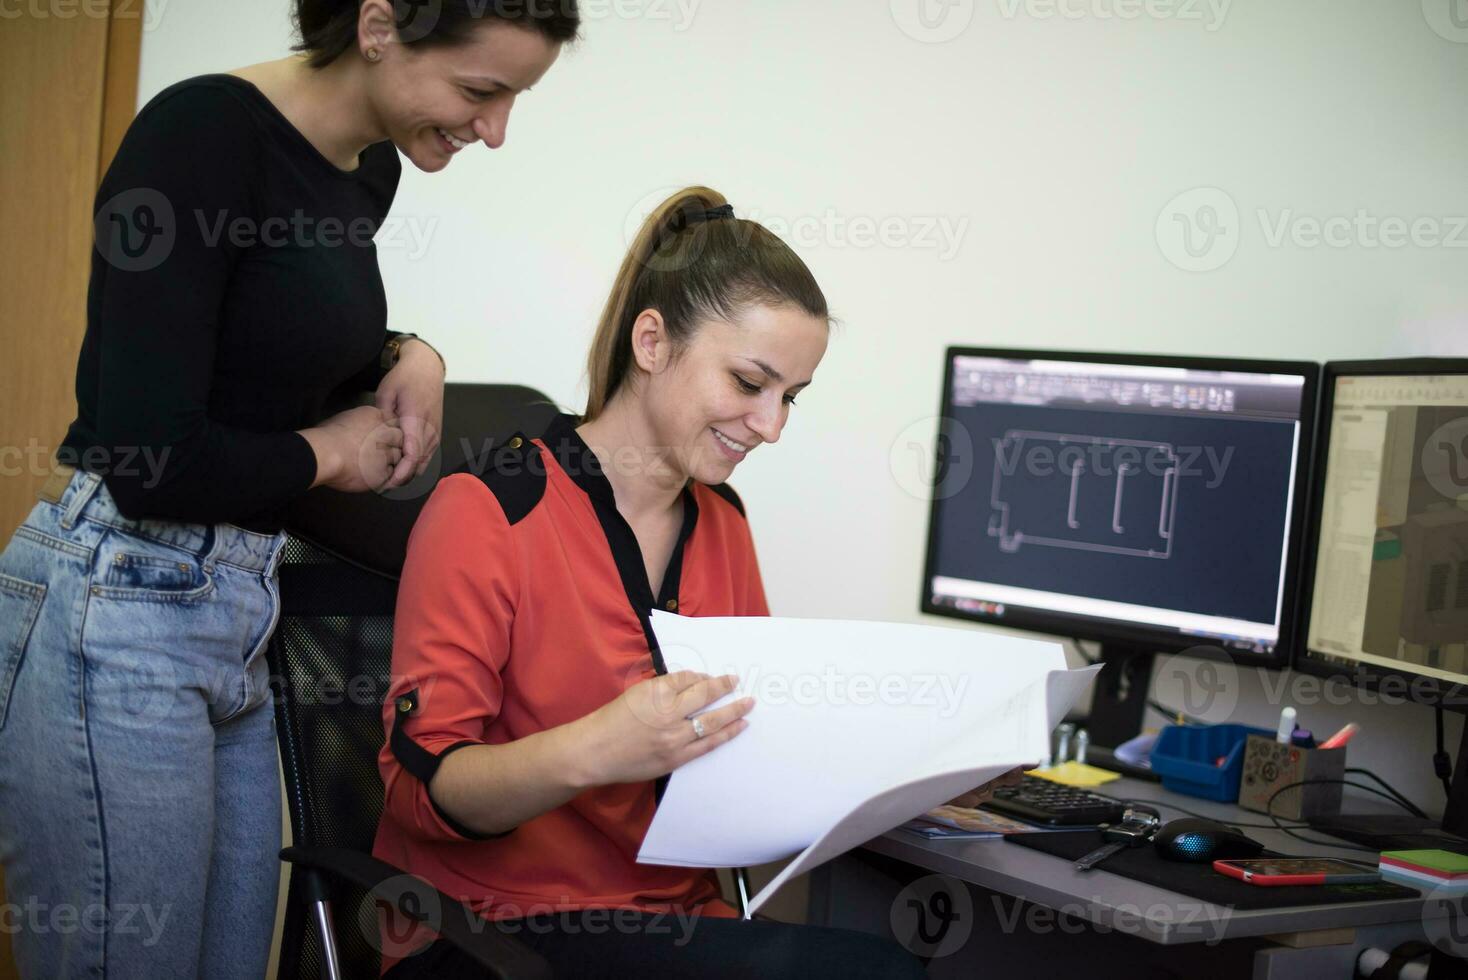 Within the heavy industry, a factory industrial engineer measures with a caliper and on a personal computer Designs a 3D model photo